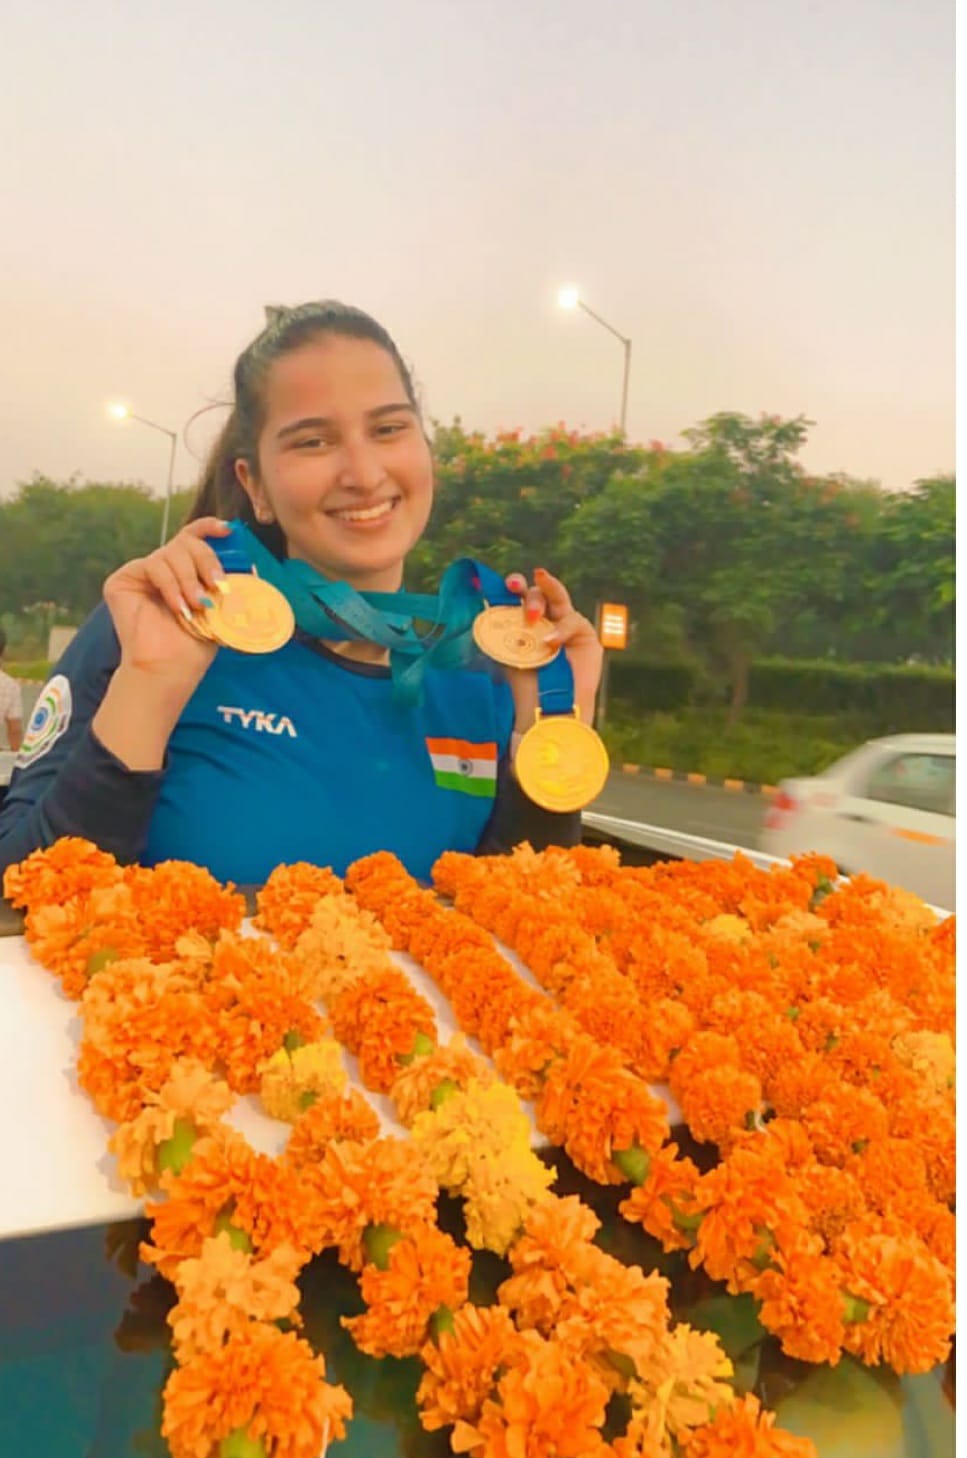 Rhythm Sangwan of Narnaul won 4 gold for India in the World Junior Shooting Championship